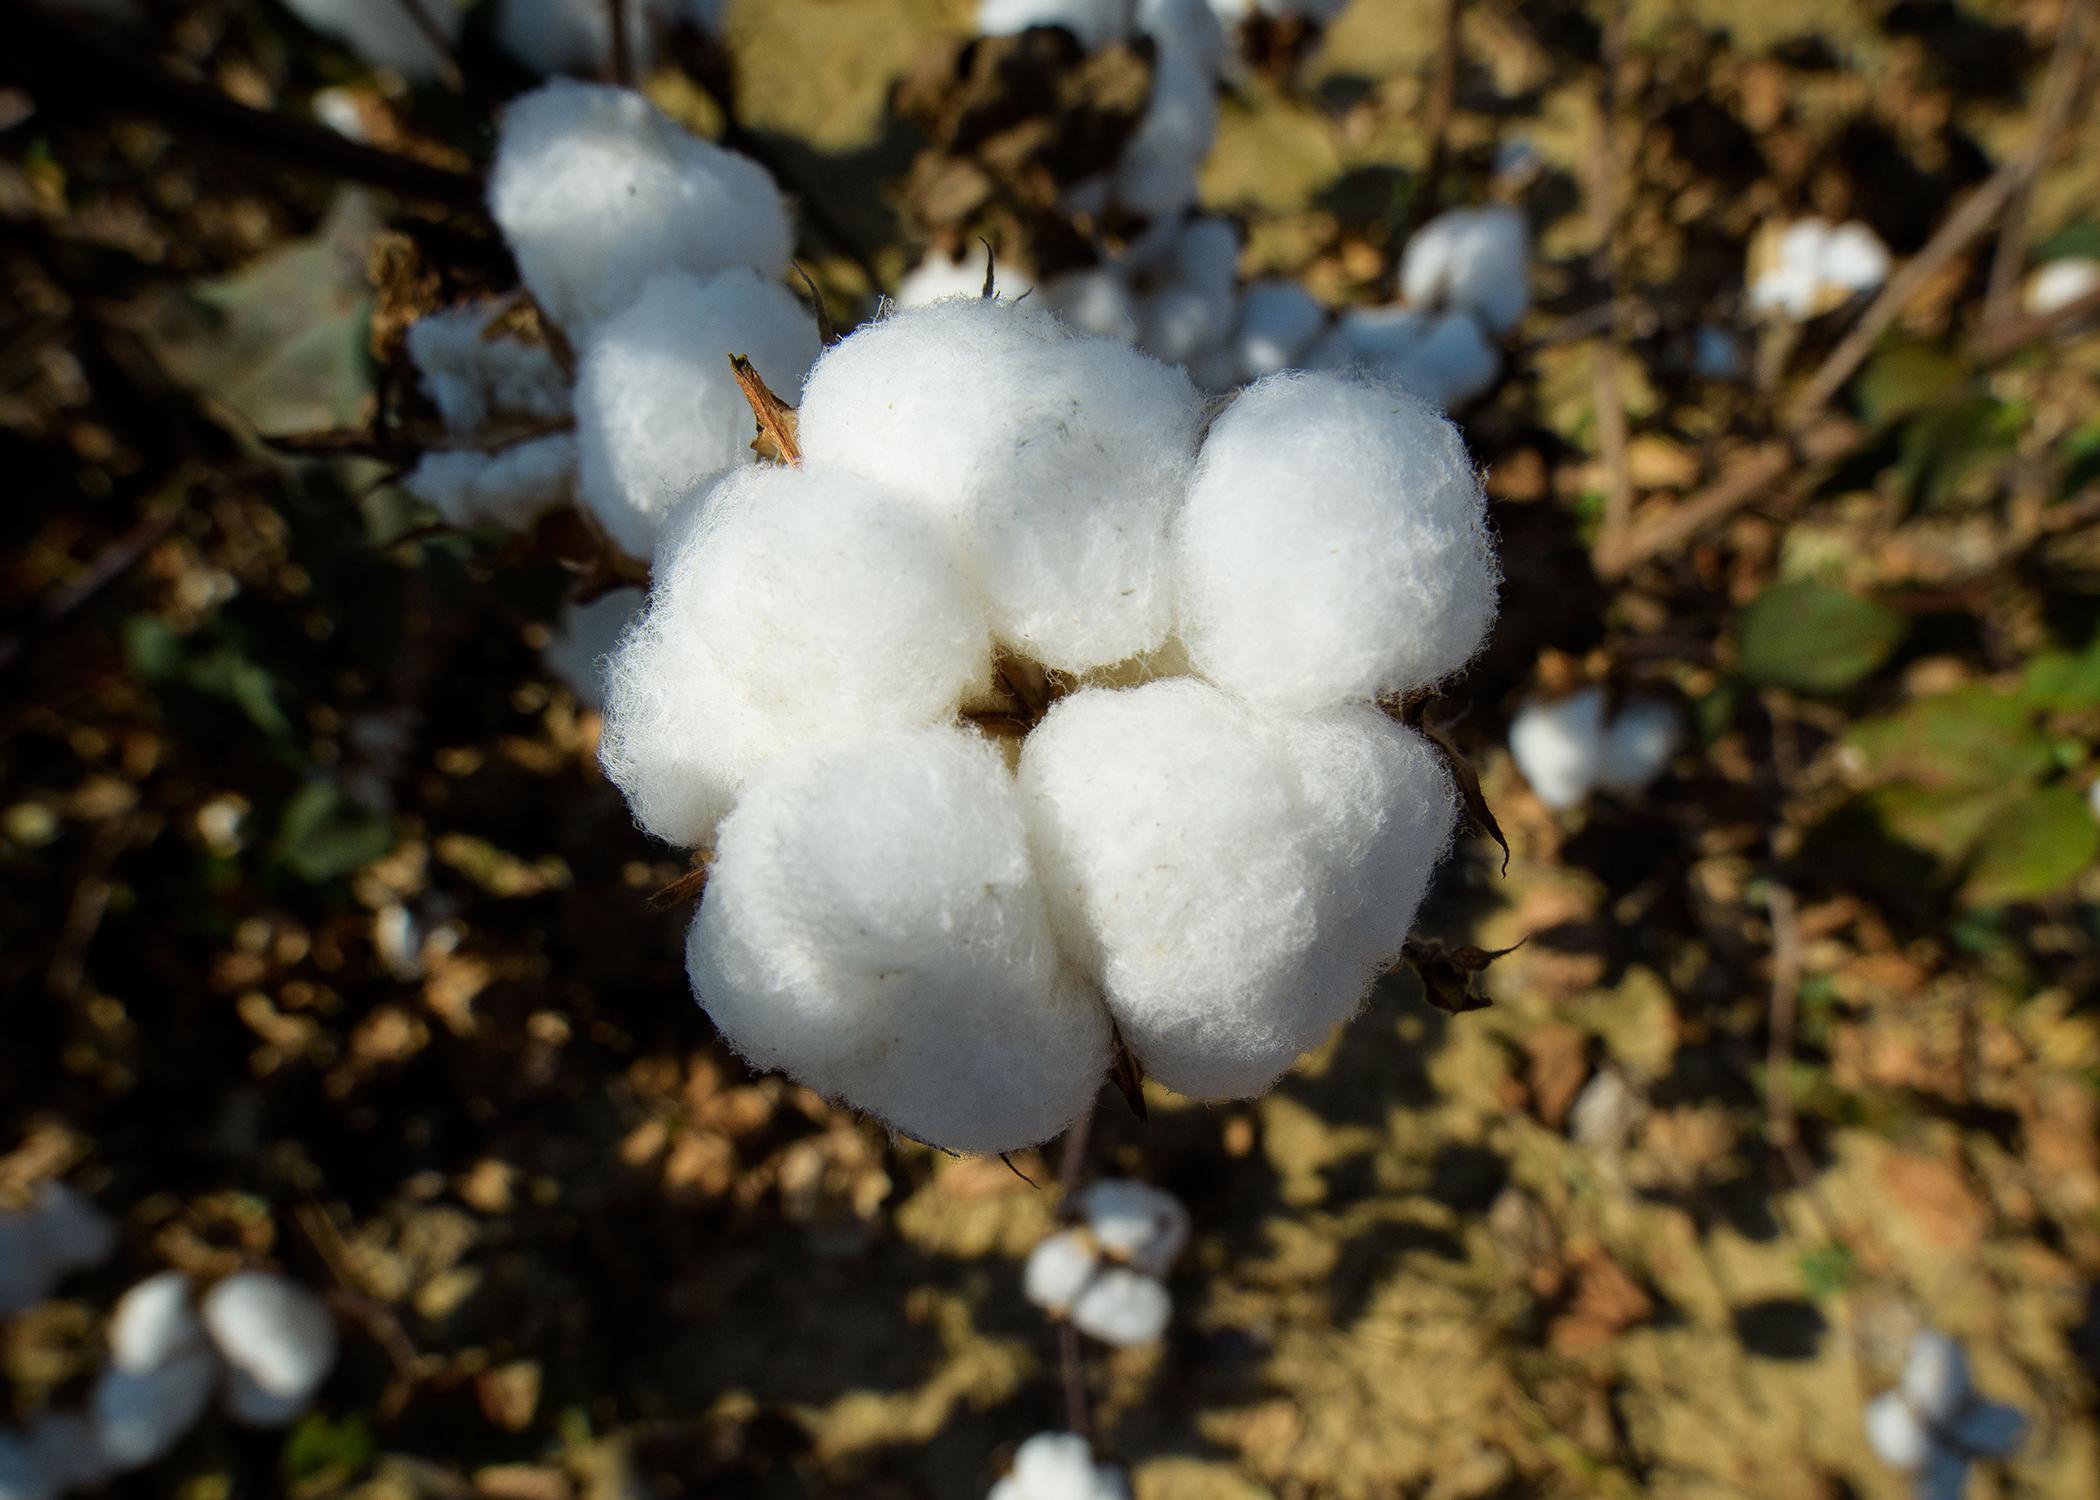 A pure white cotton boll opens on a brown stem.